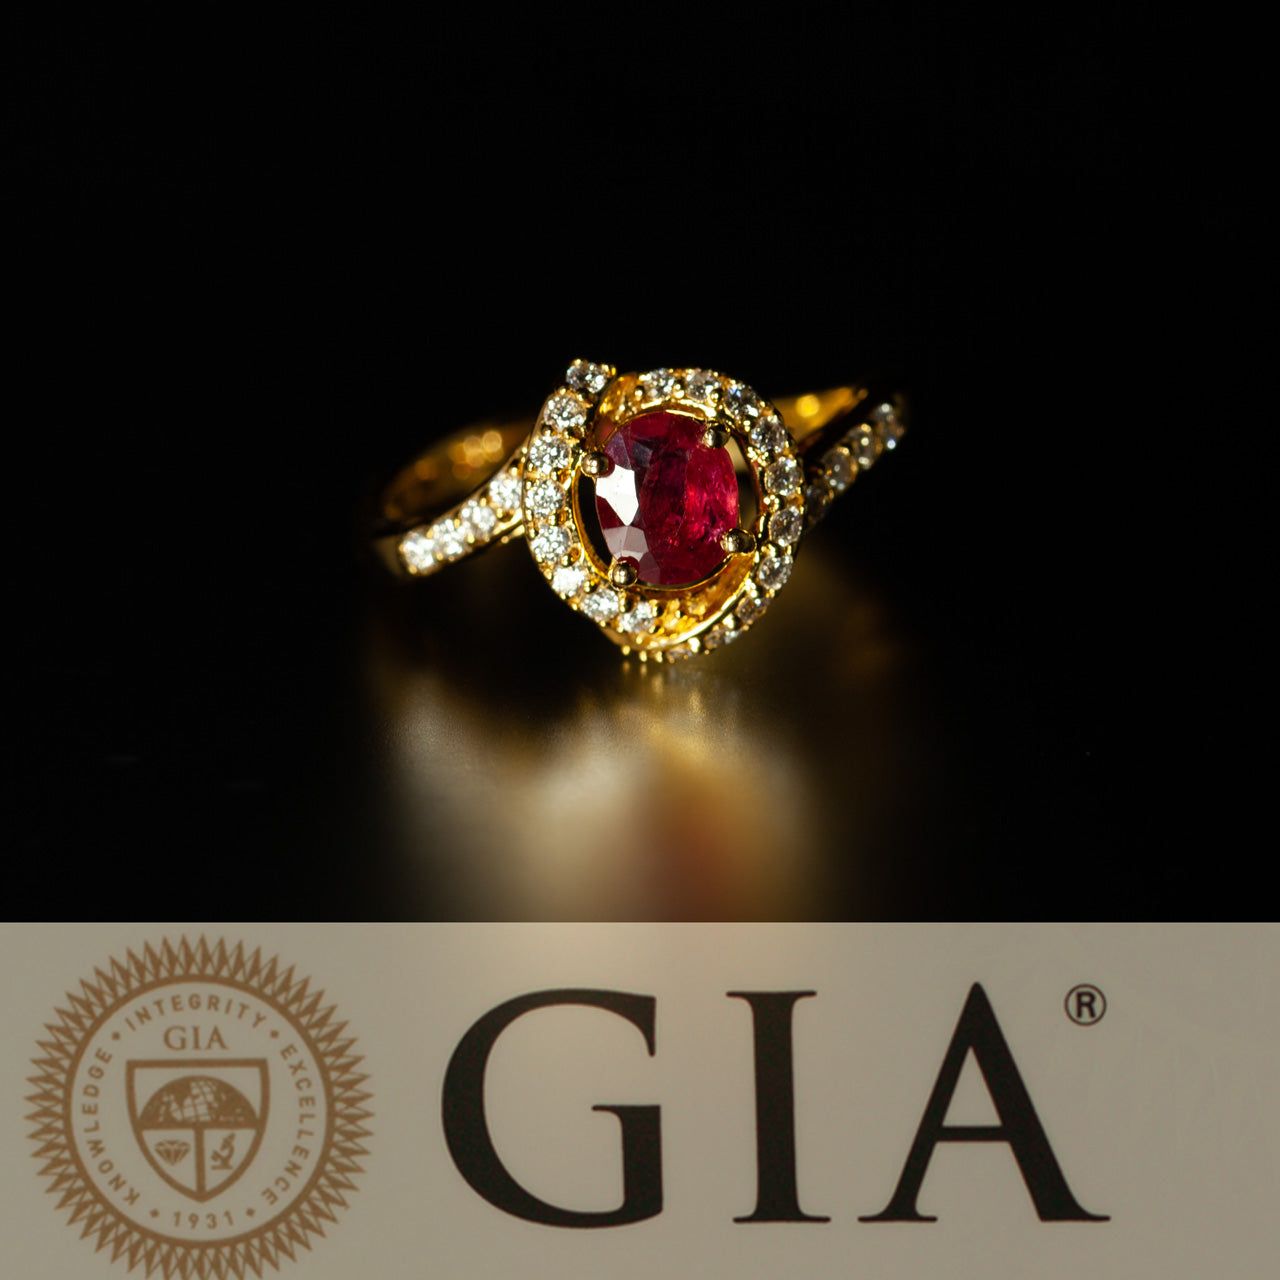 Close-up of a 0.54ct natural ruby set in an 18k yellow gold band